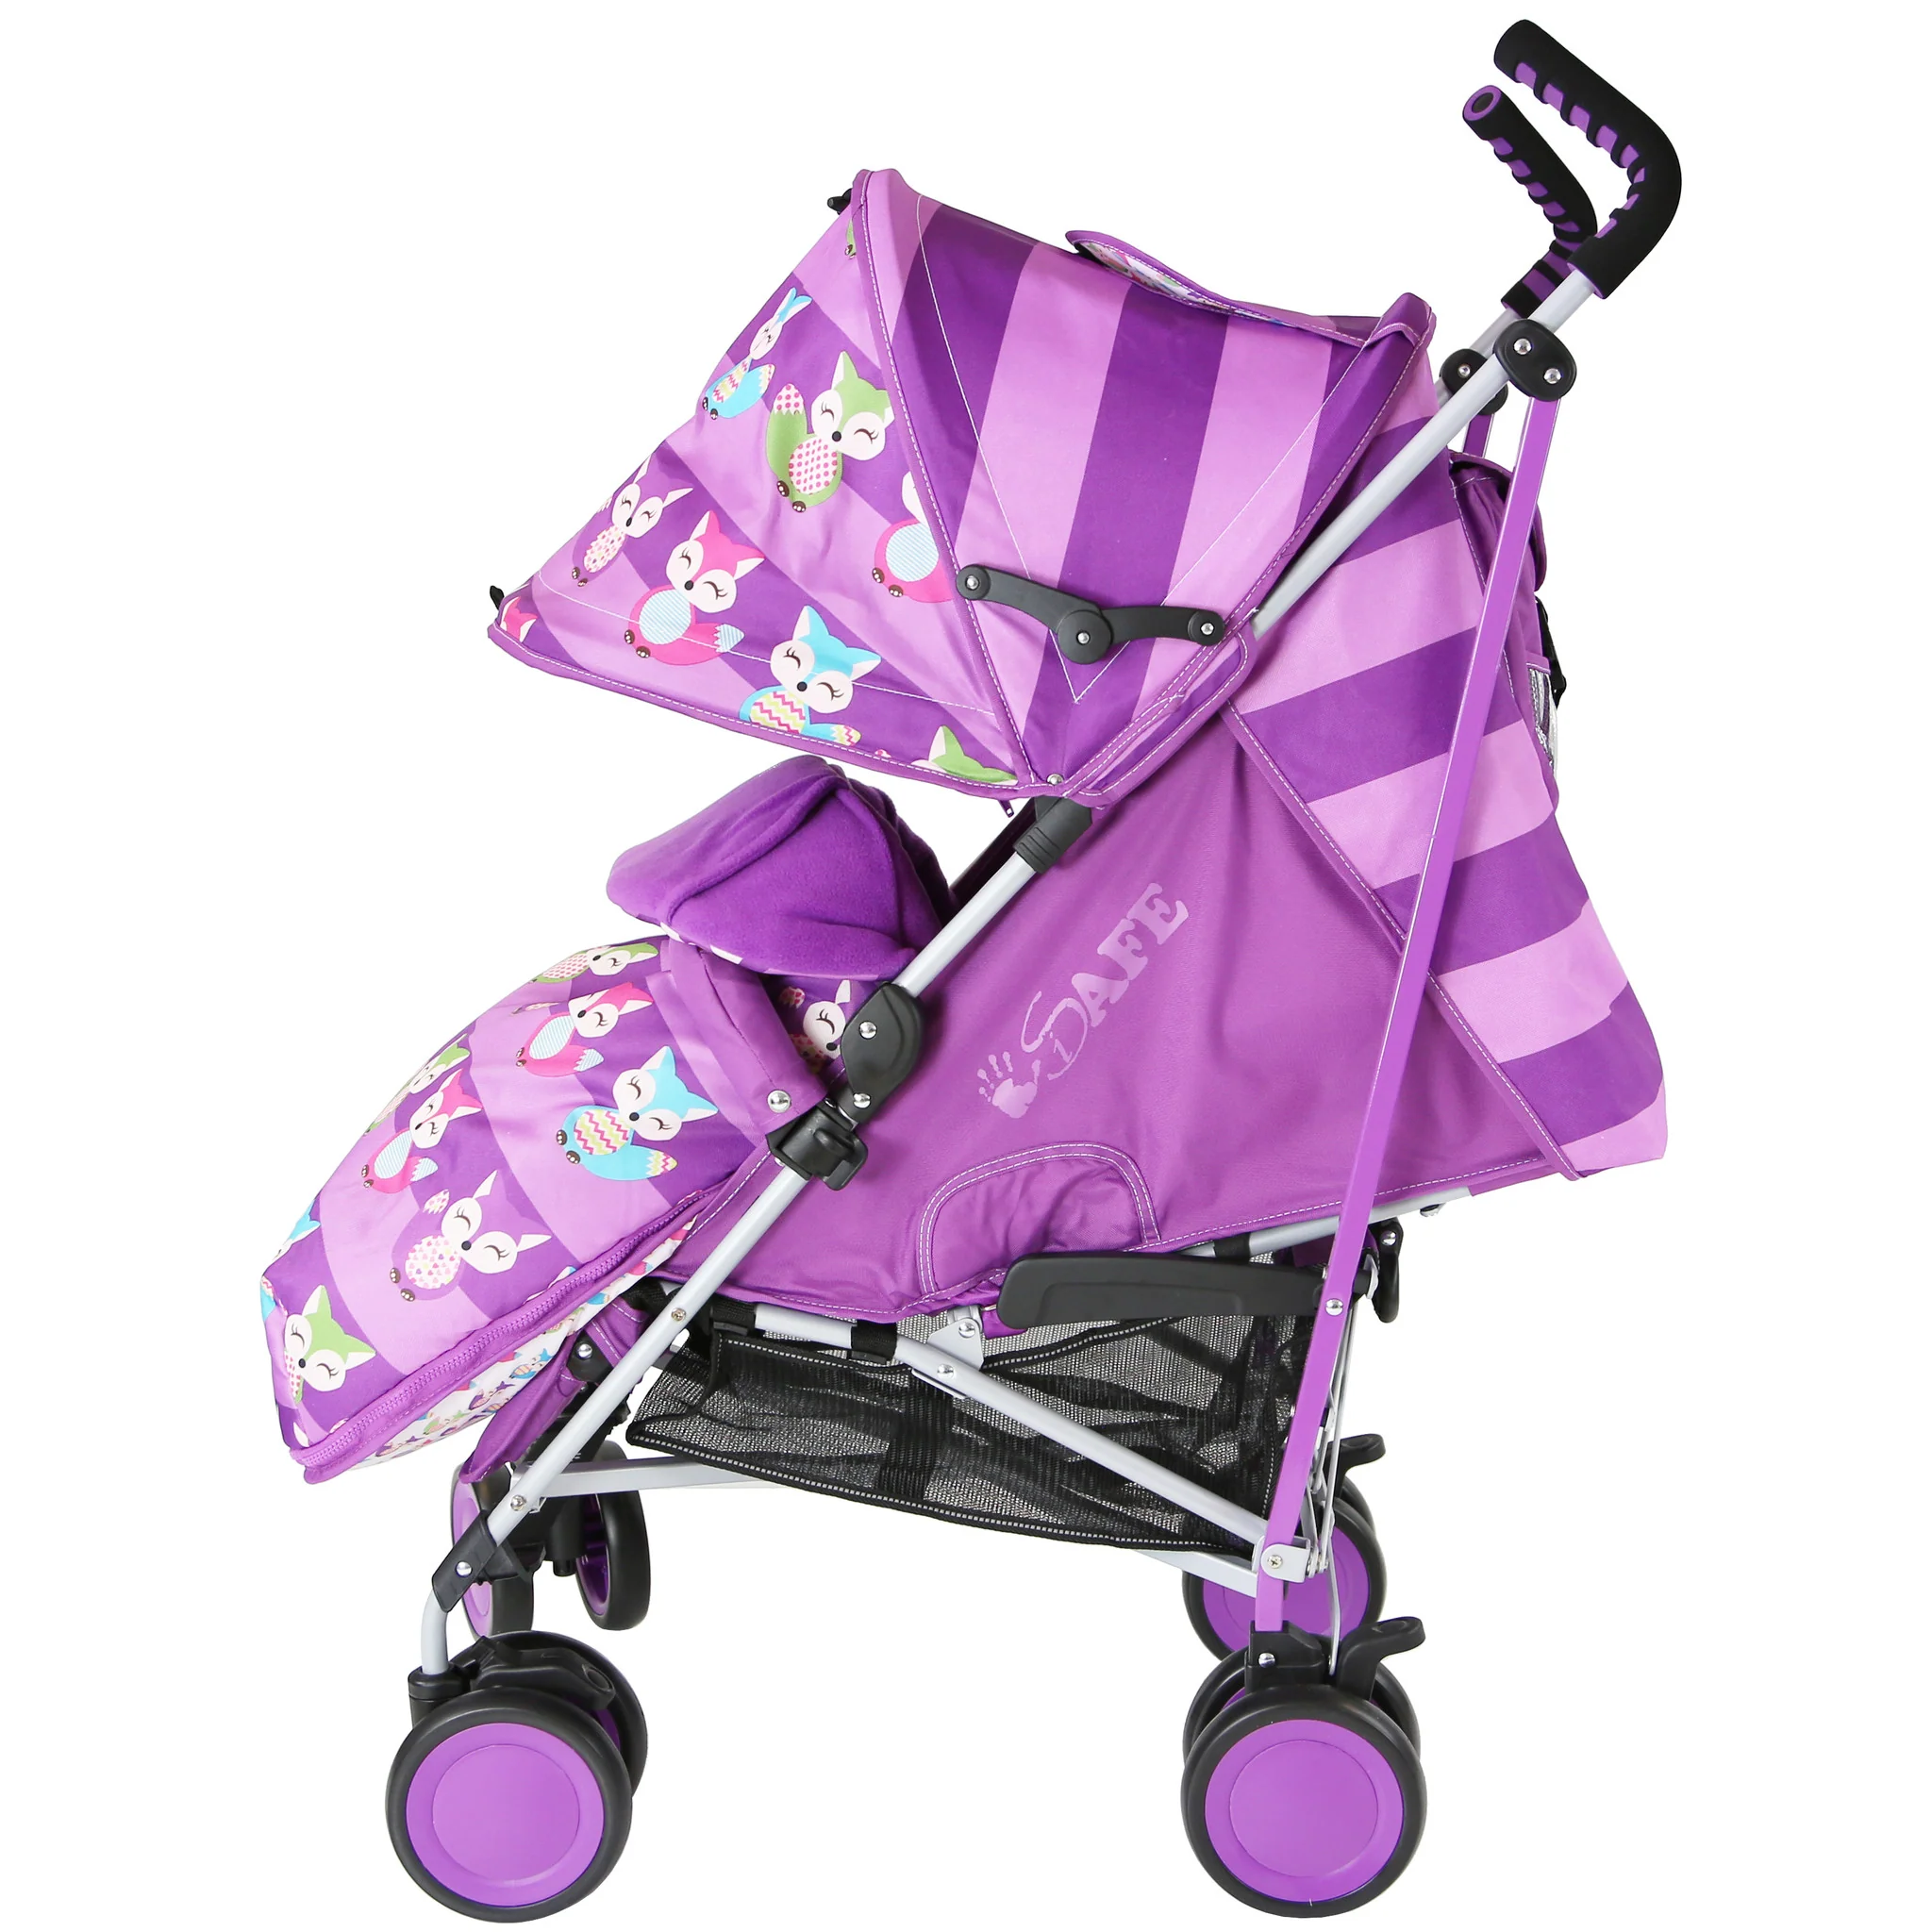 Raincover iSafe Stroller Foxy Design Complete with Footmuff Headhugger Bumper Bar